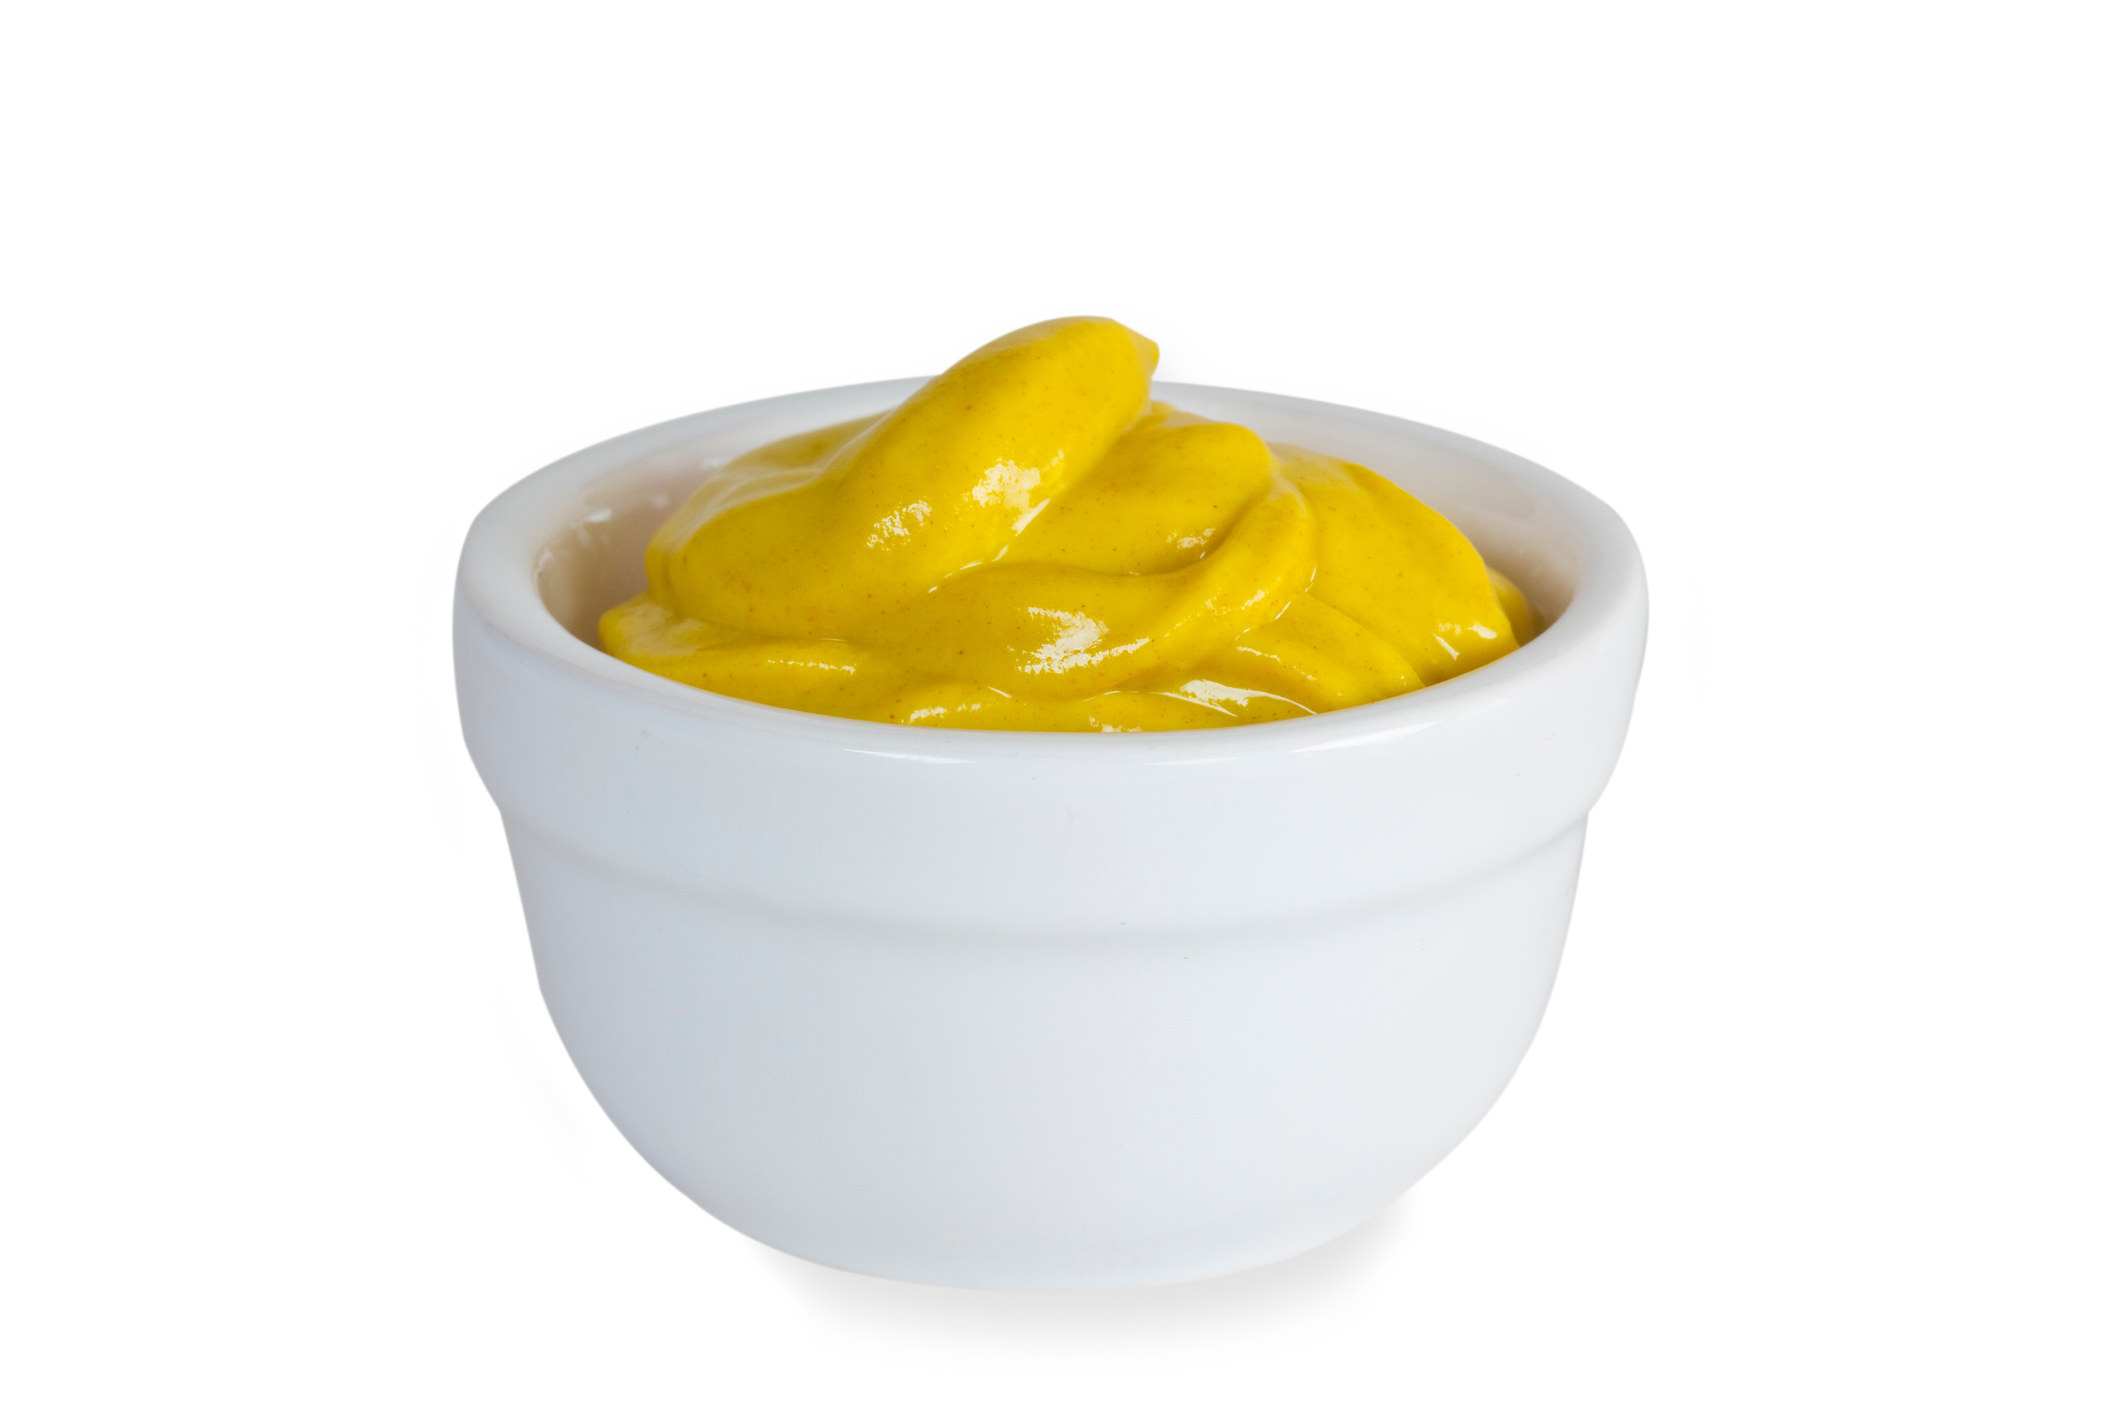 A small container of yellow mustard